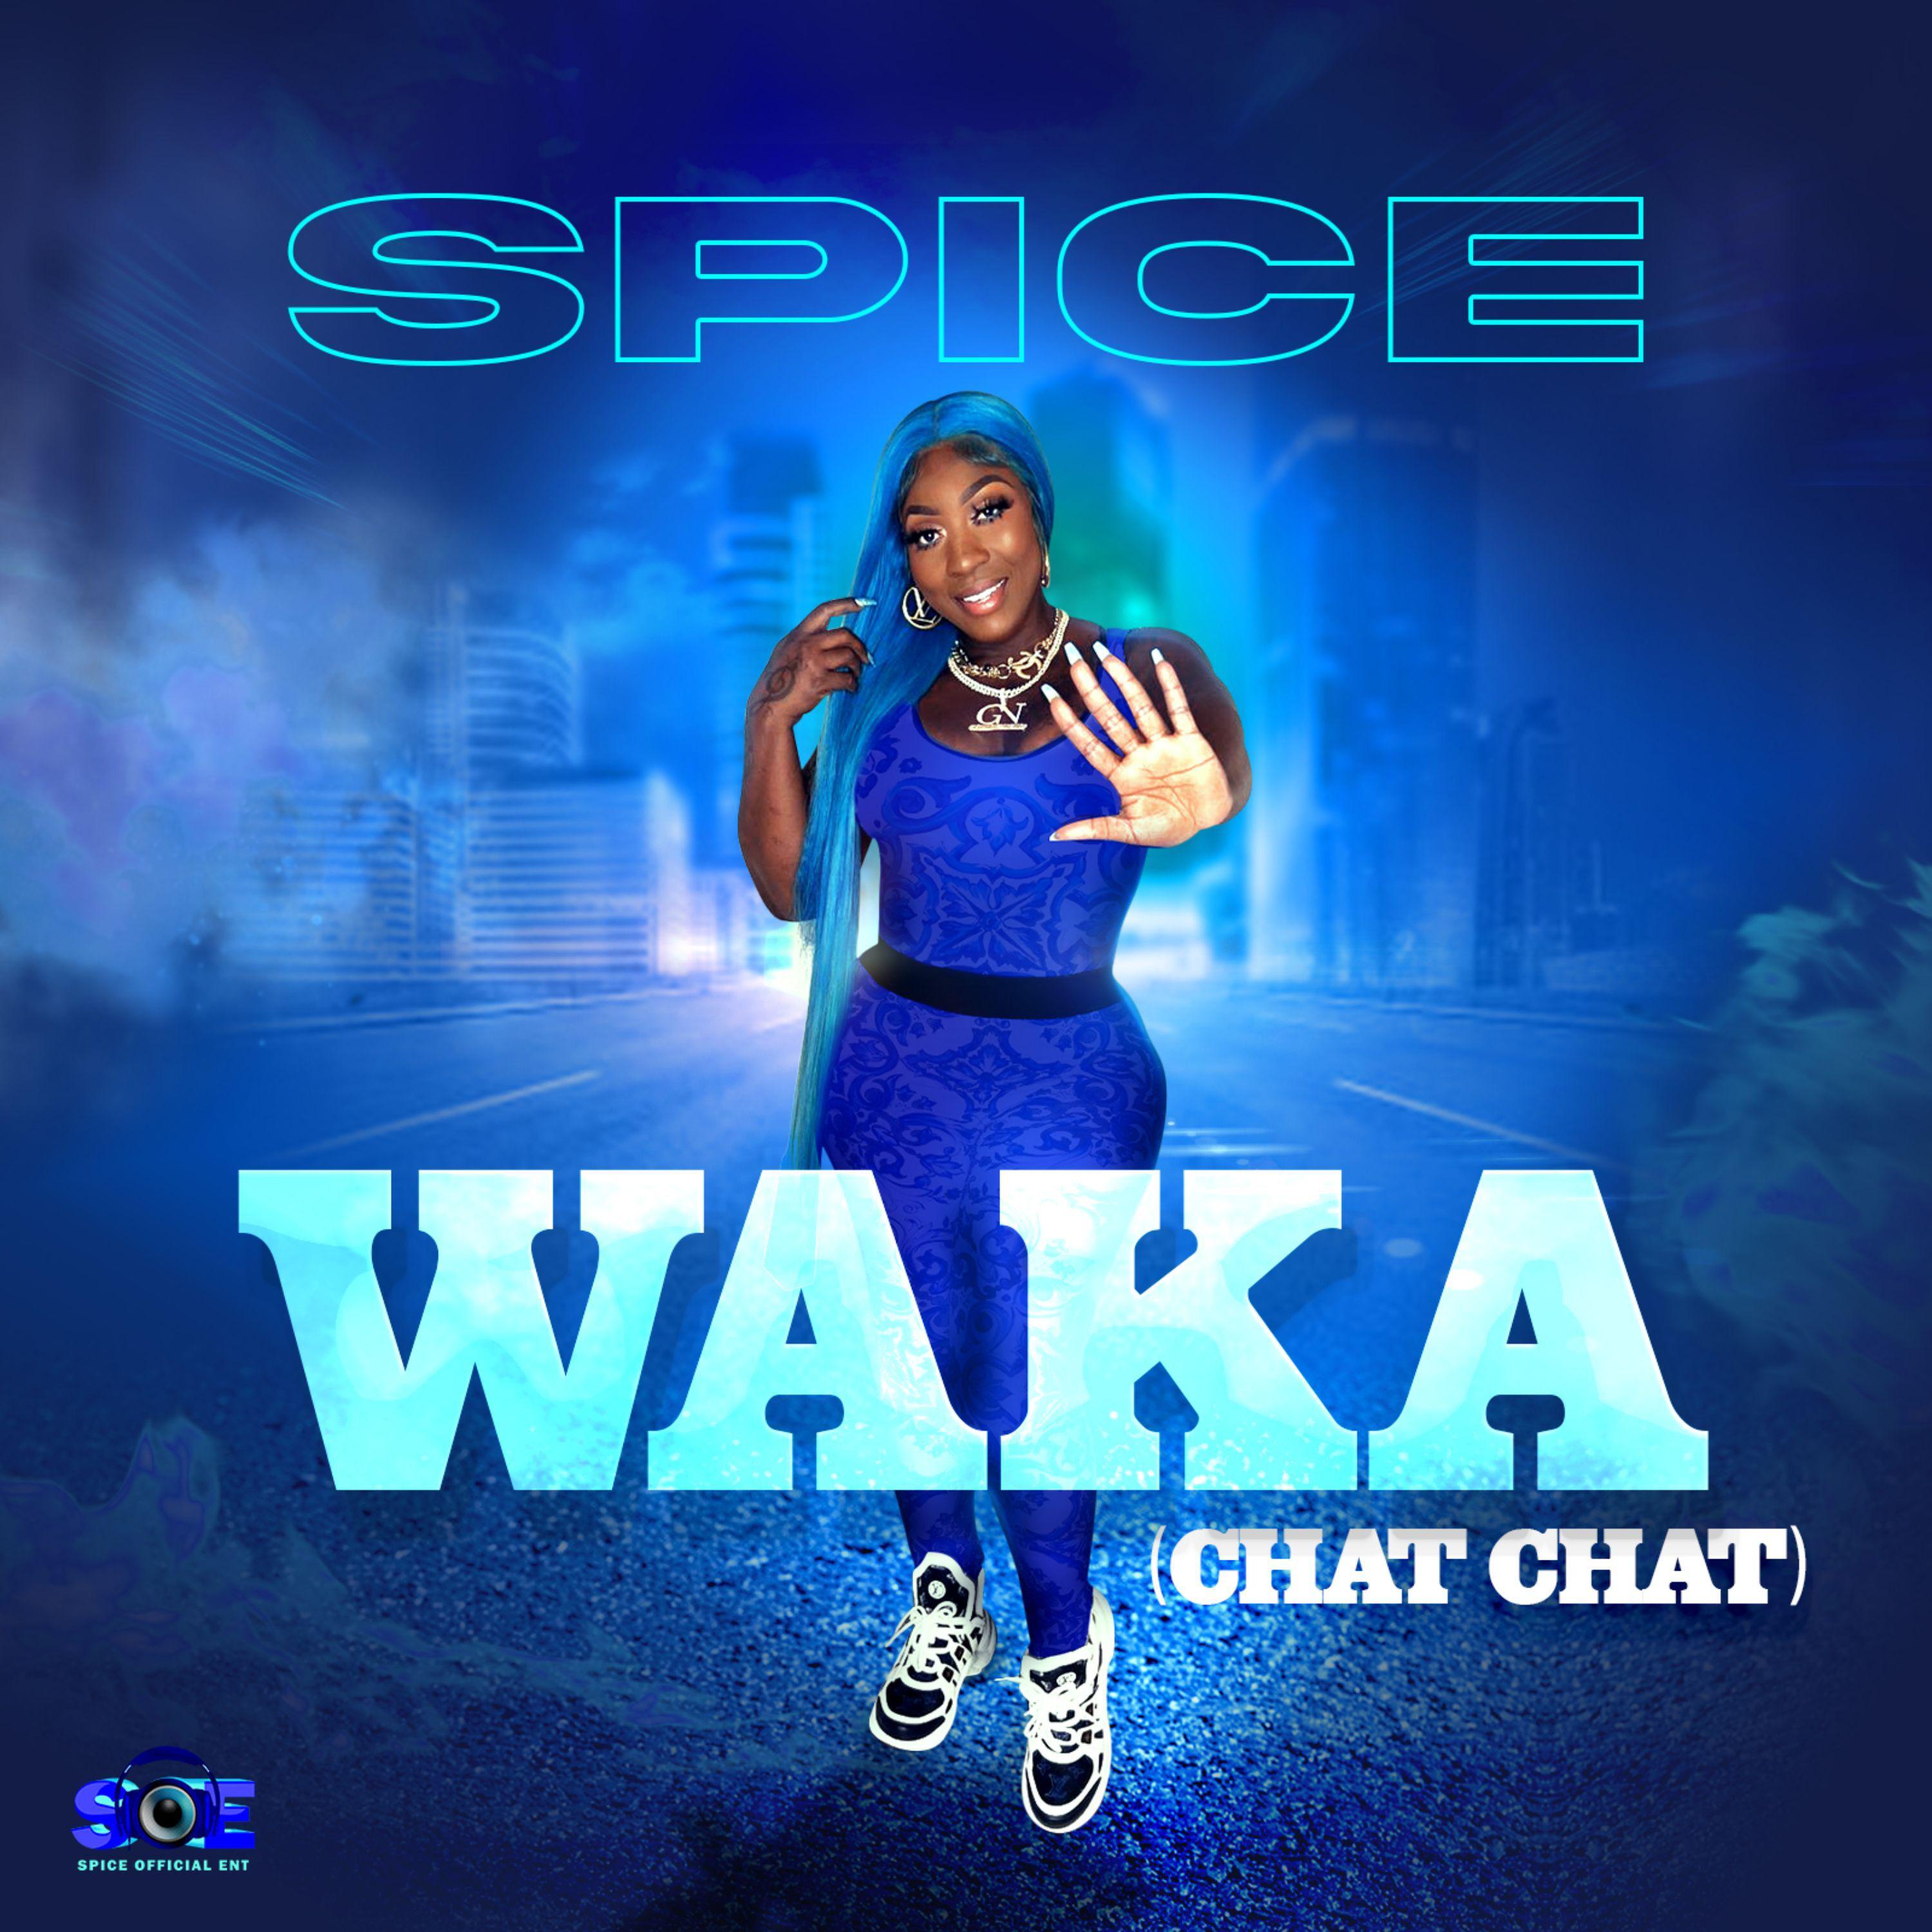 Spice - WAKA (Chat Chat)